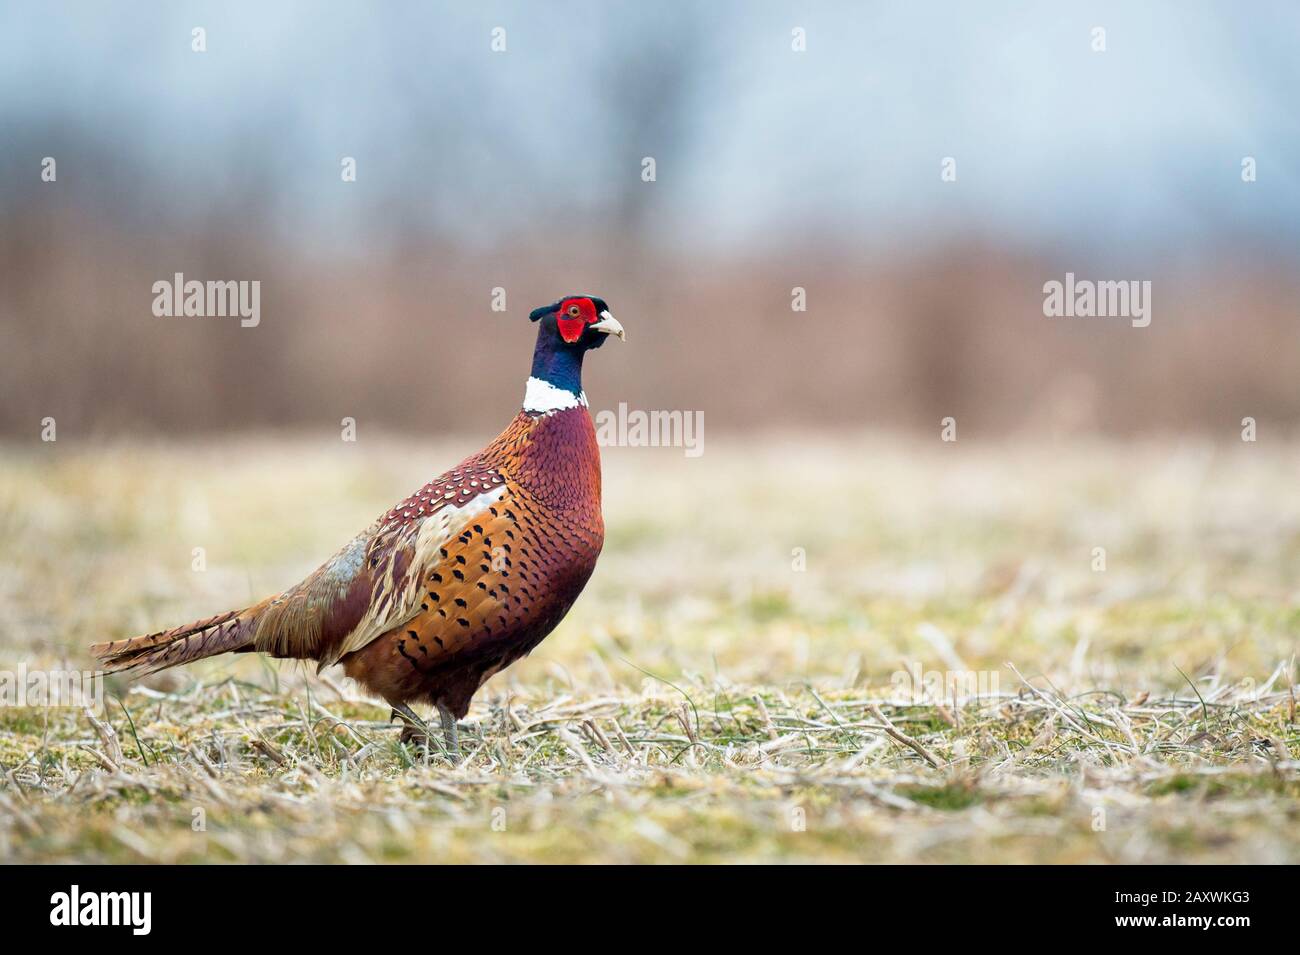 A Ring-necked Pheasant walks in an open field in soft overcast light on a winter day. Stock Photo